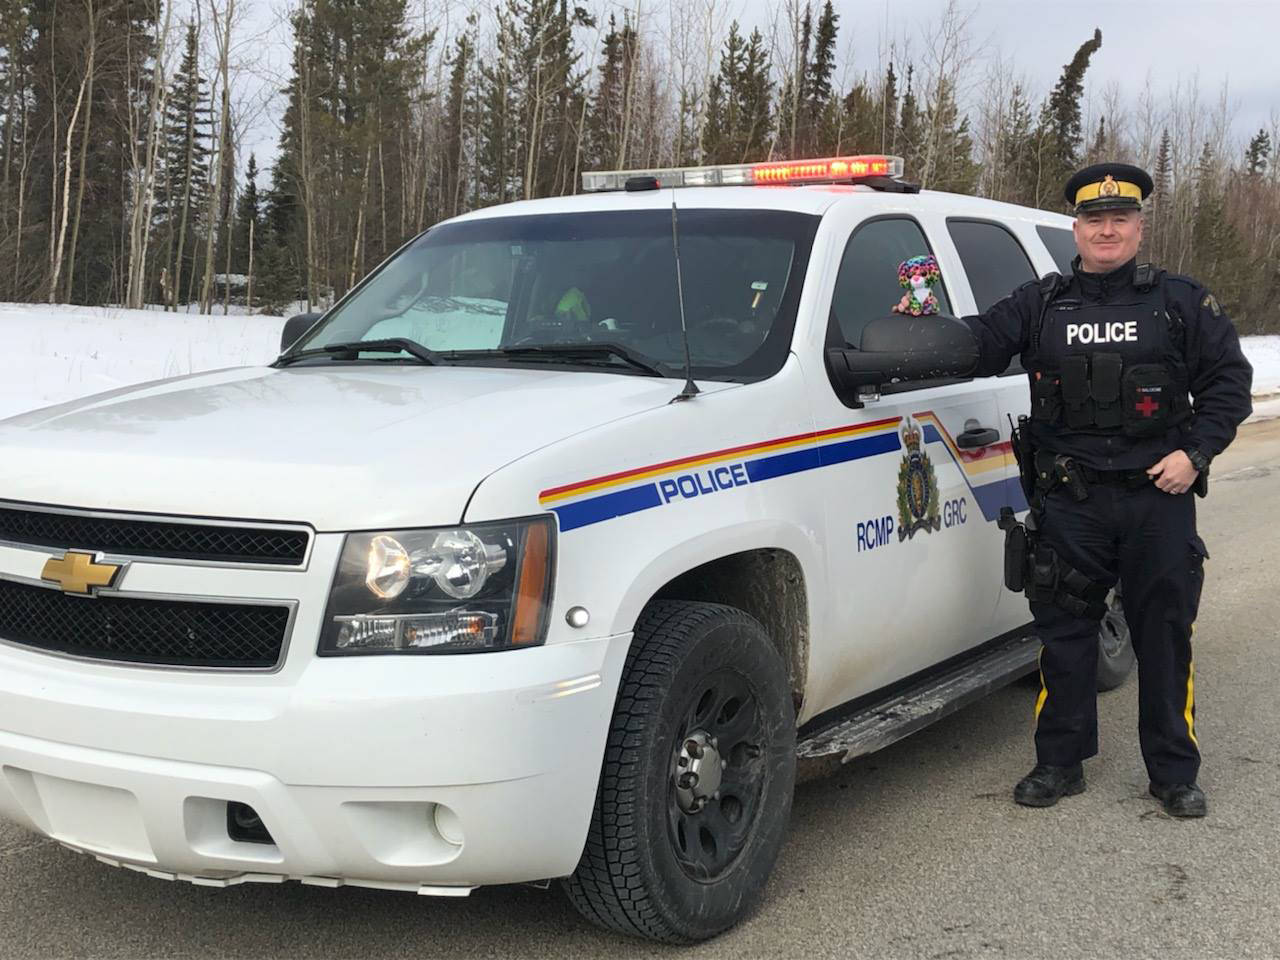 Photos courtesy of the Alberta Sheriffs and Athabasca RCMP